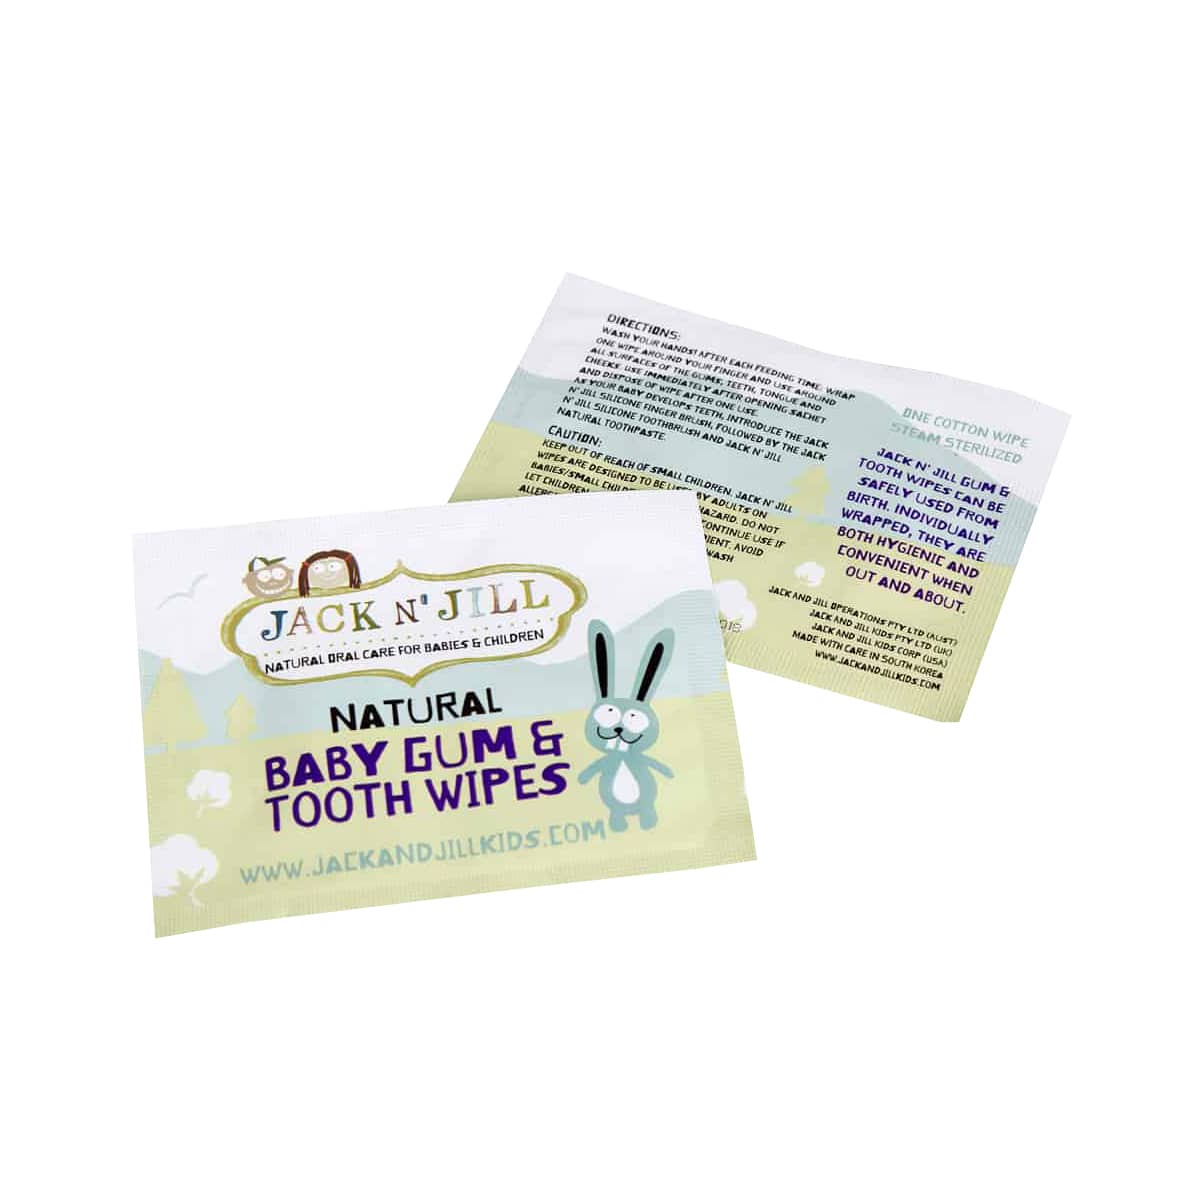 Jack N' Jill Natural Baby and Gum Tooth Wipes